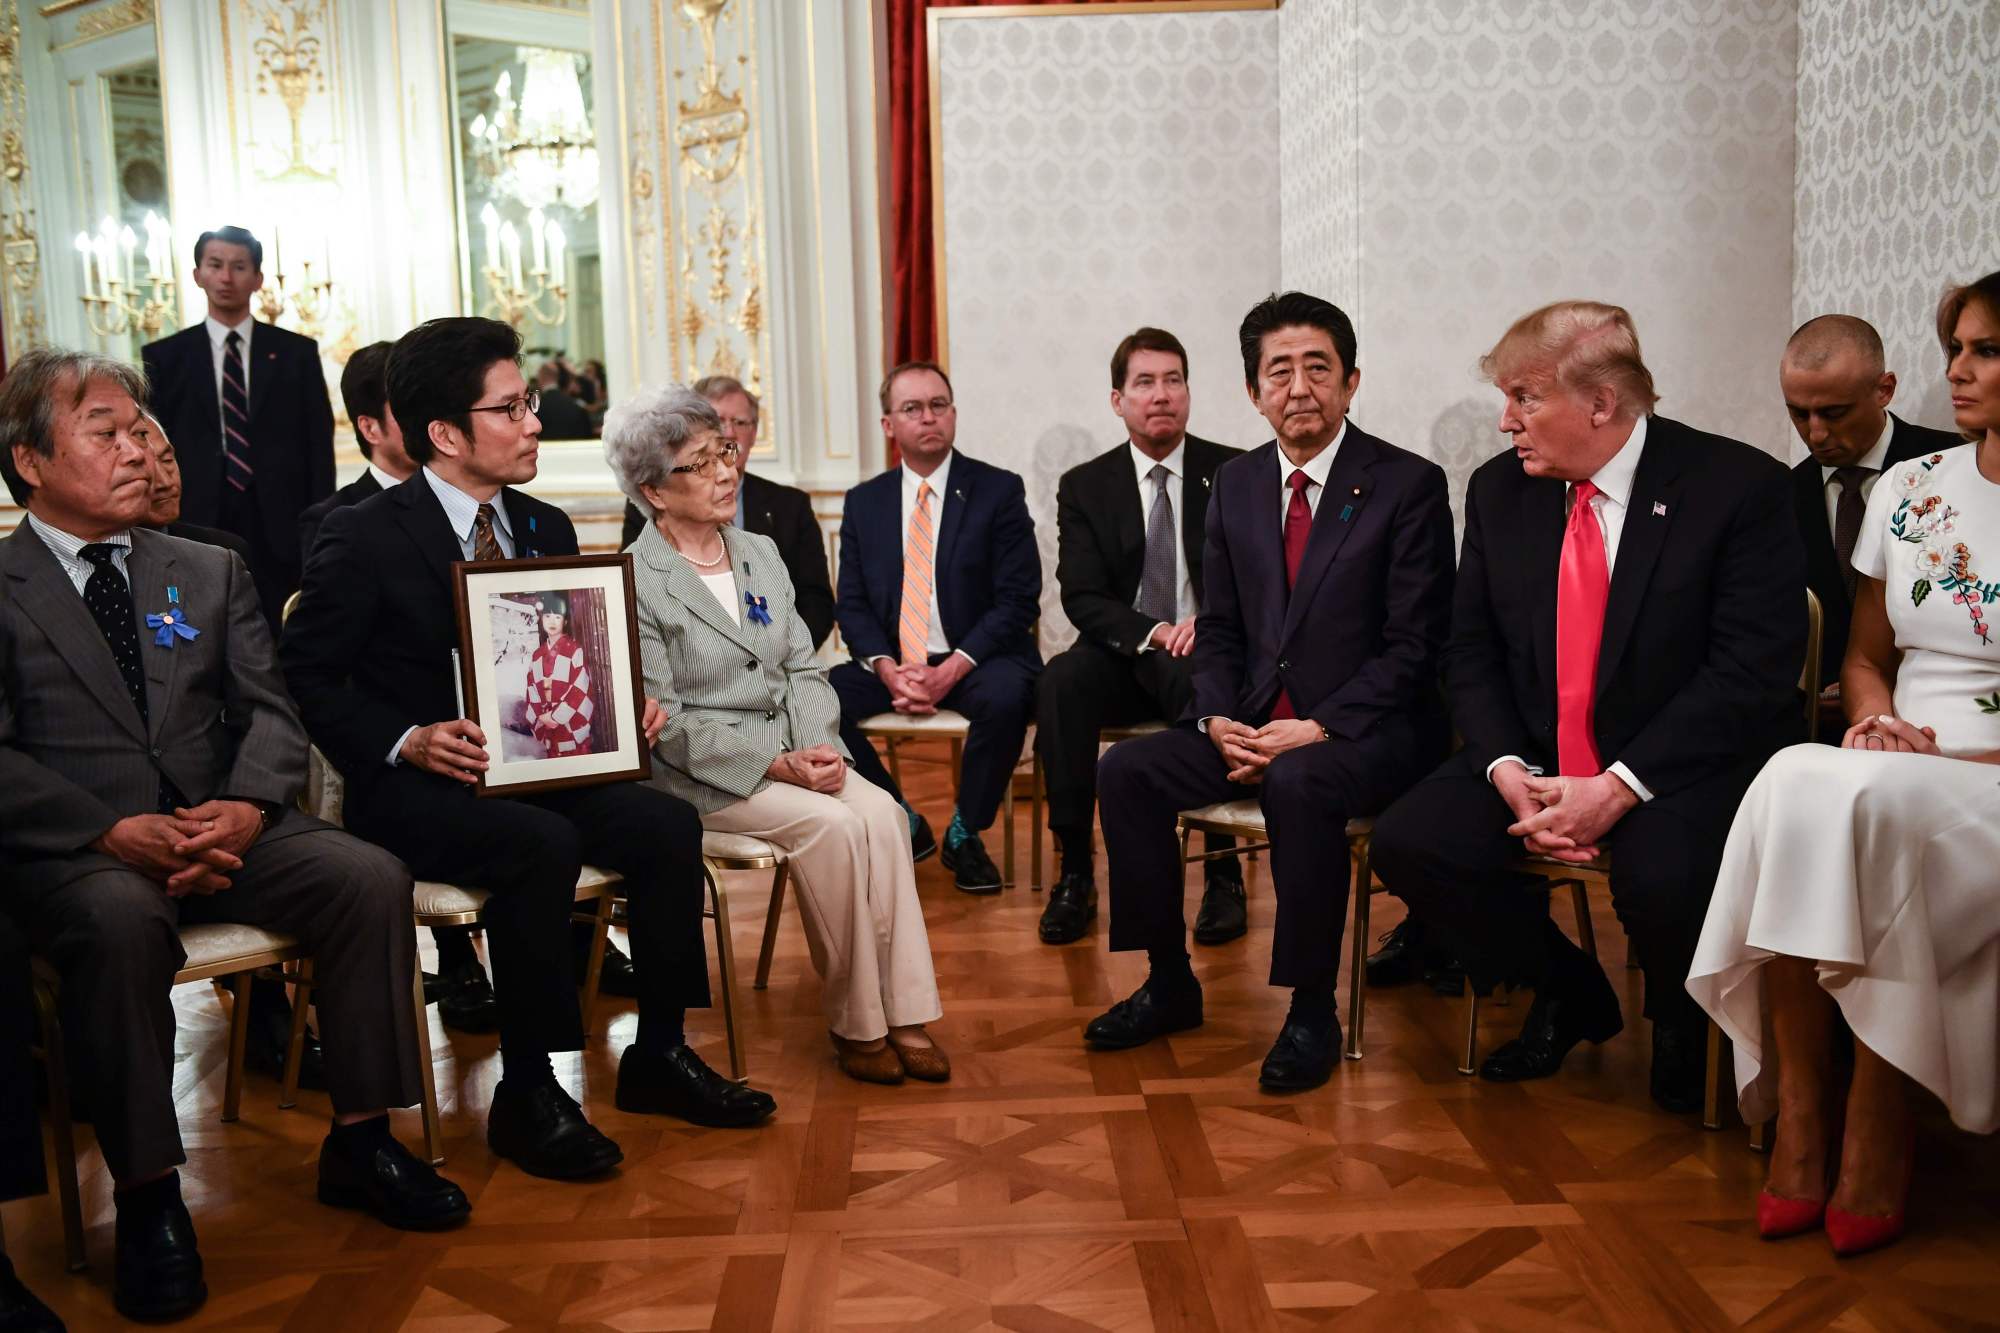 During a meeting in Tokyo on Monday, U.S. President Donald Trump speaks to the relatives of Japanese nationals abducted by North Korea decades ago as first lady Melania Trump and Prime Minister Shinzo Abe look on. | AFP-JIJI